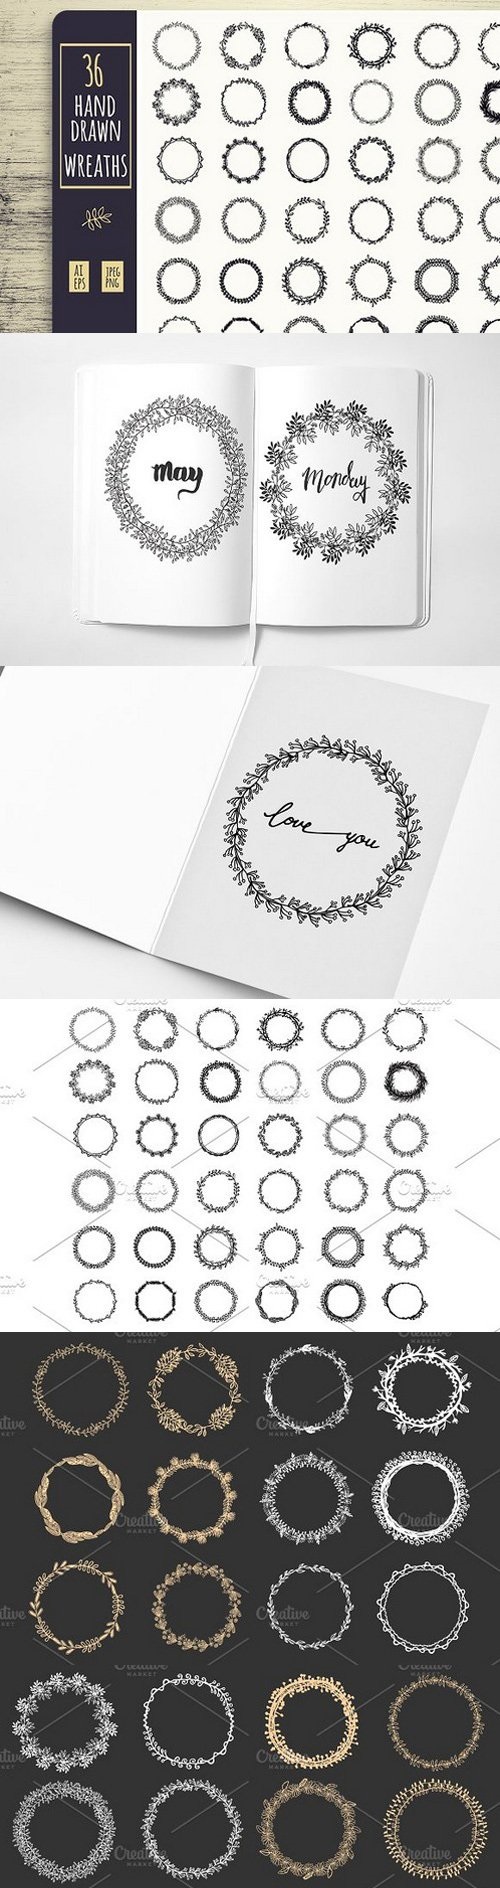 Floral hand drawn wreaths collection 1634471